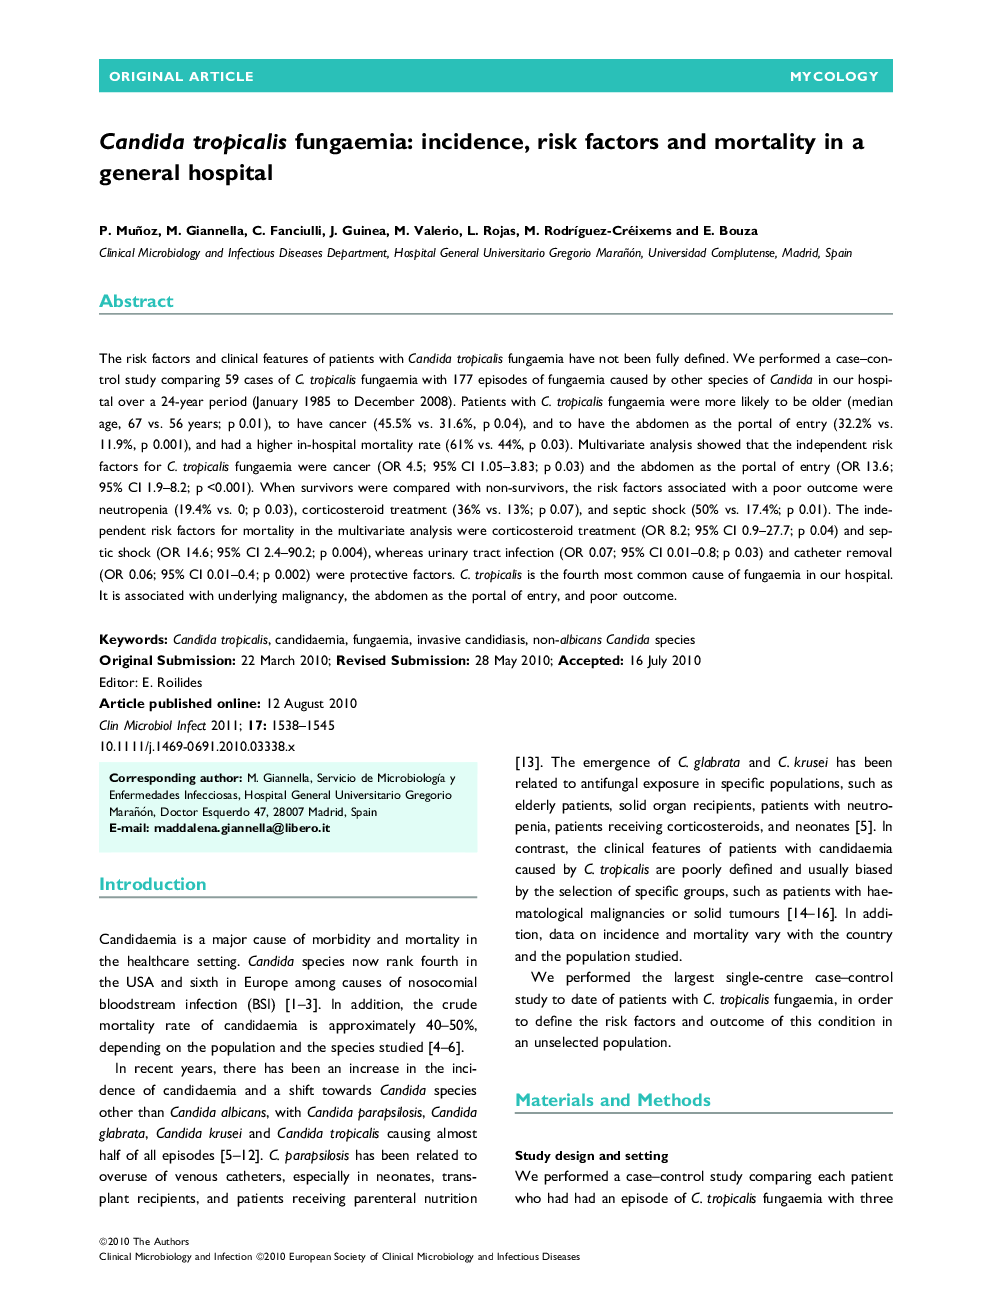 Candida tropicalis fungaemia: incidence, risk factors and mortality in a general hospital 